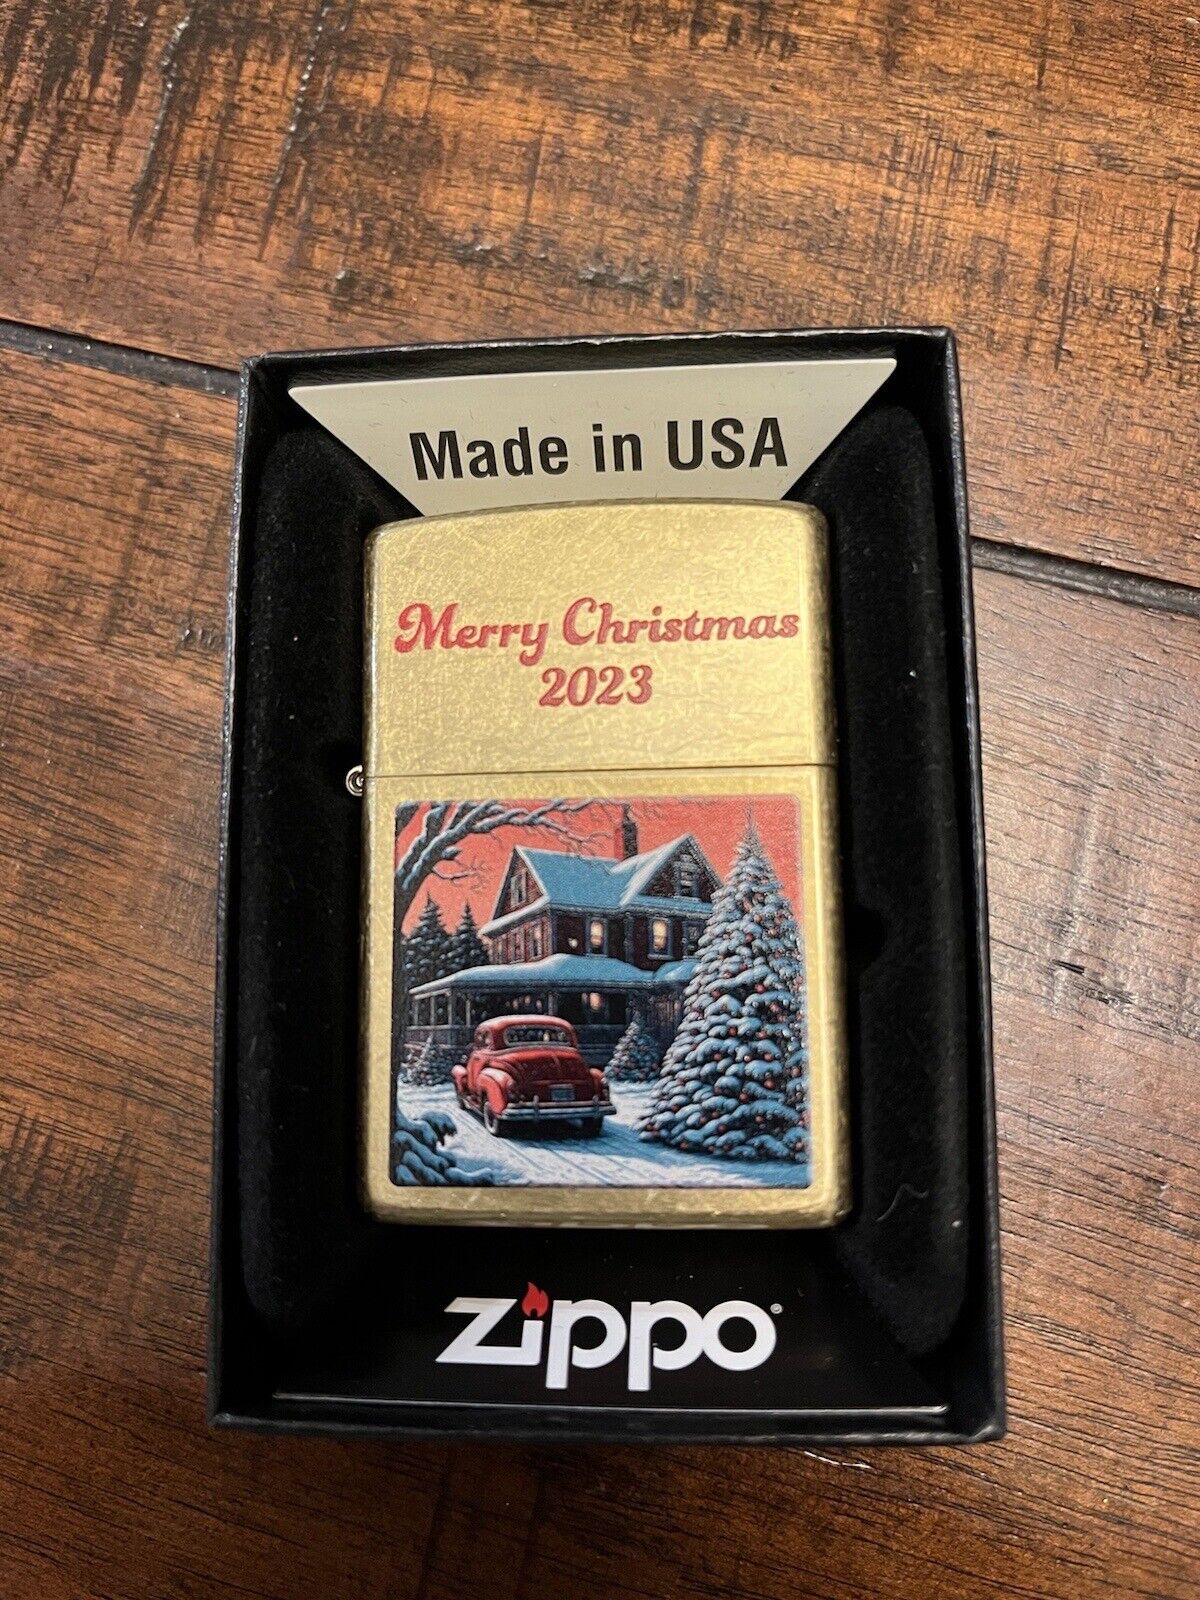 MERRY CHRISTMAS 2023 VINTAGE CAR AND HOUSE TREE SNOW ZIPPO LIGHTER MINT IN BOX